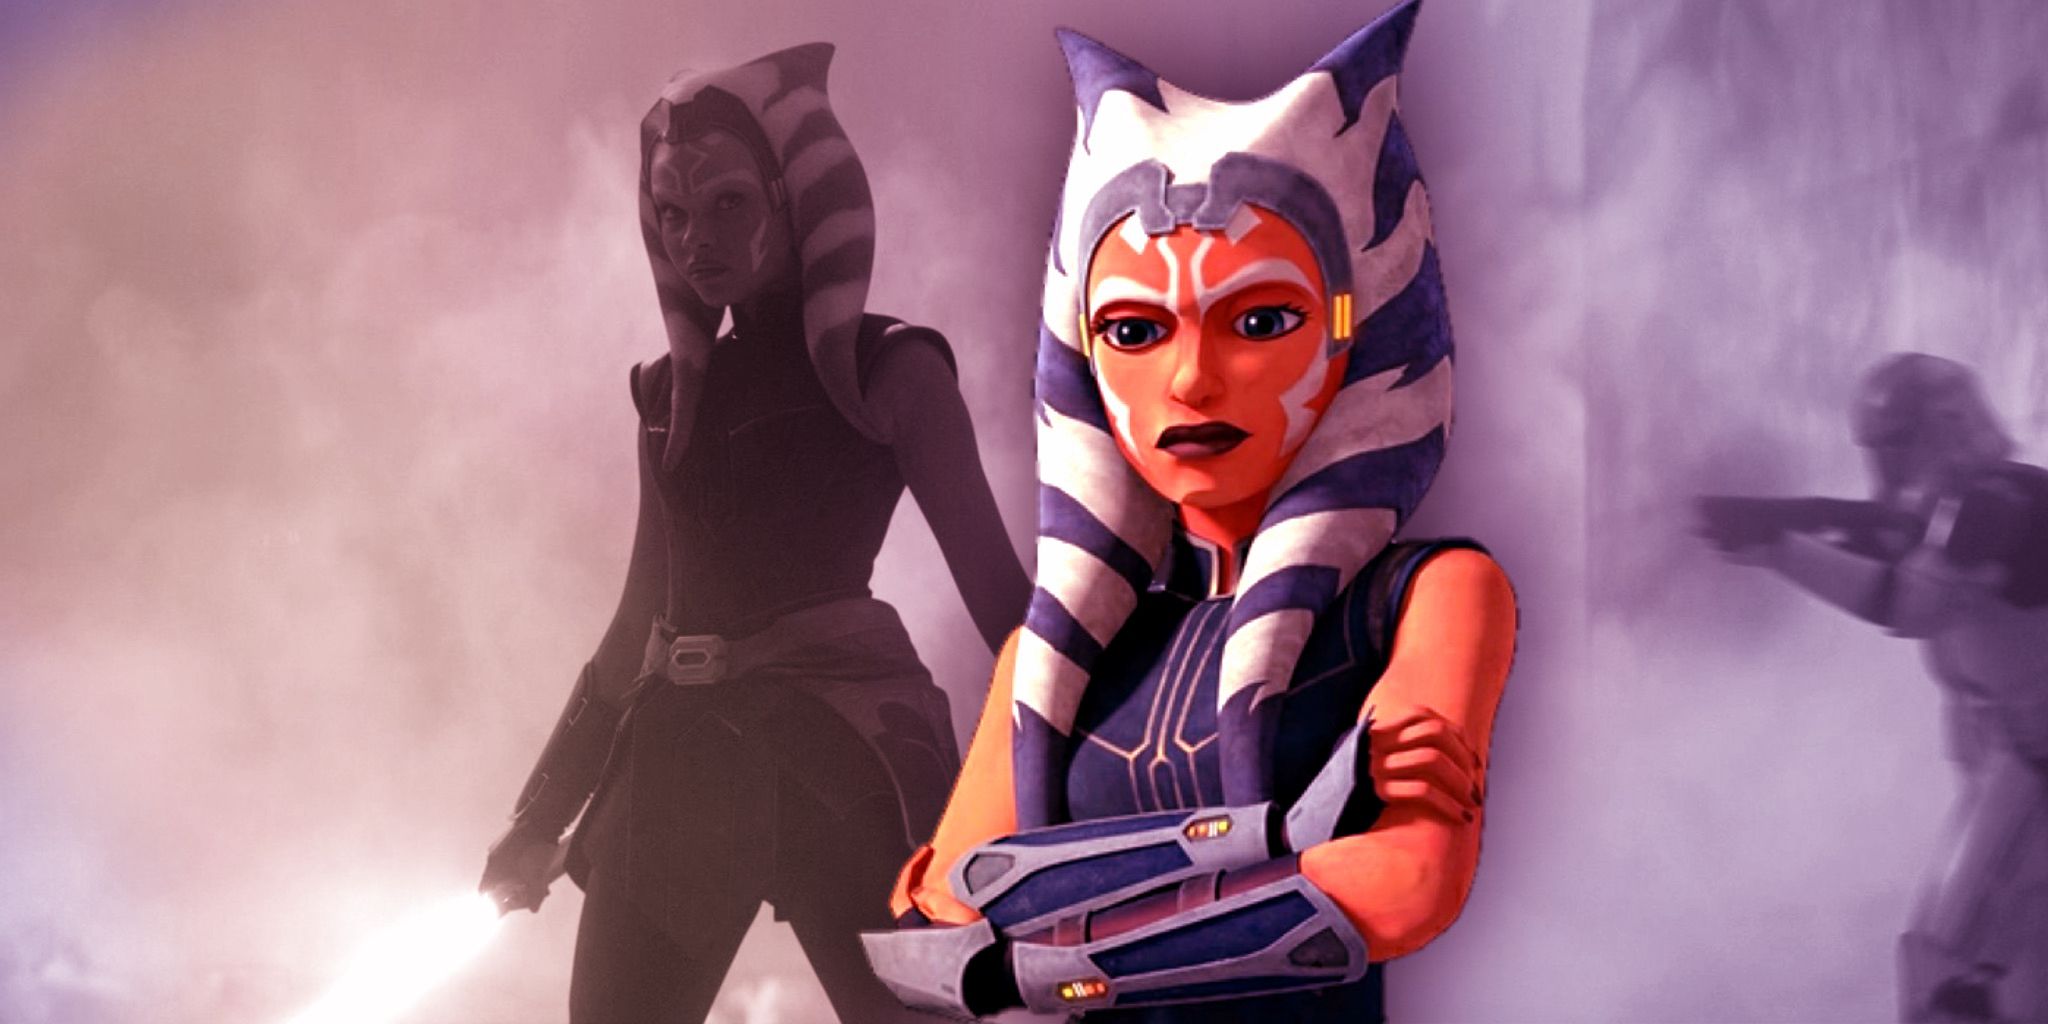 Ahsoka Tano from the Siege of Mandalore in Clone Wars, in both animation and live-action.